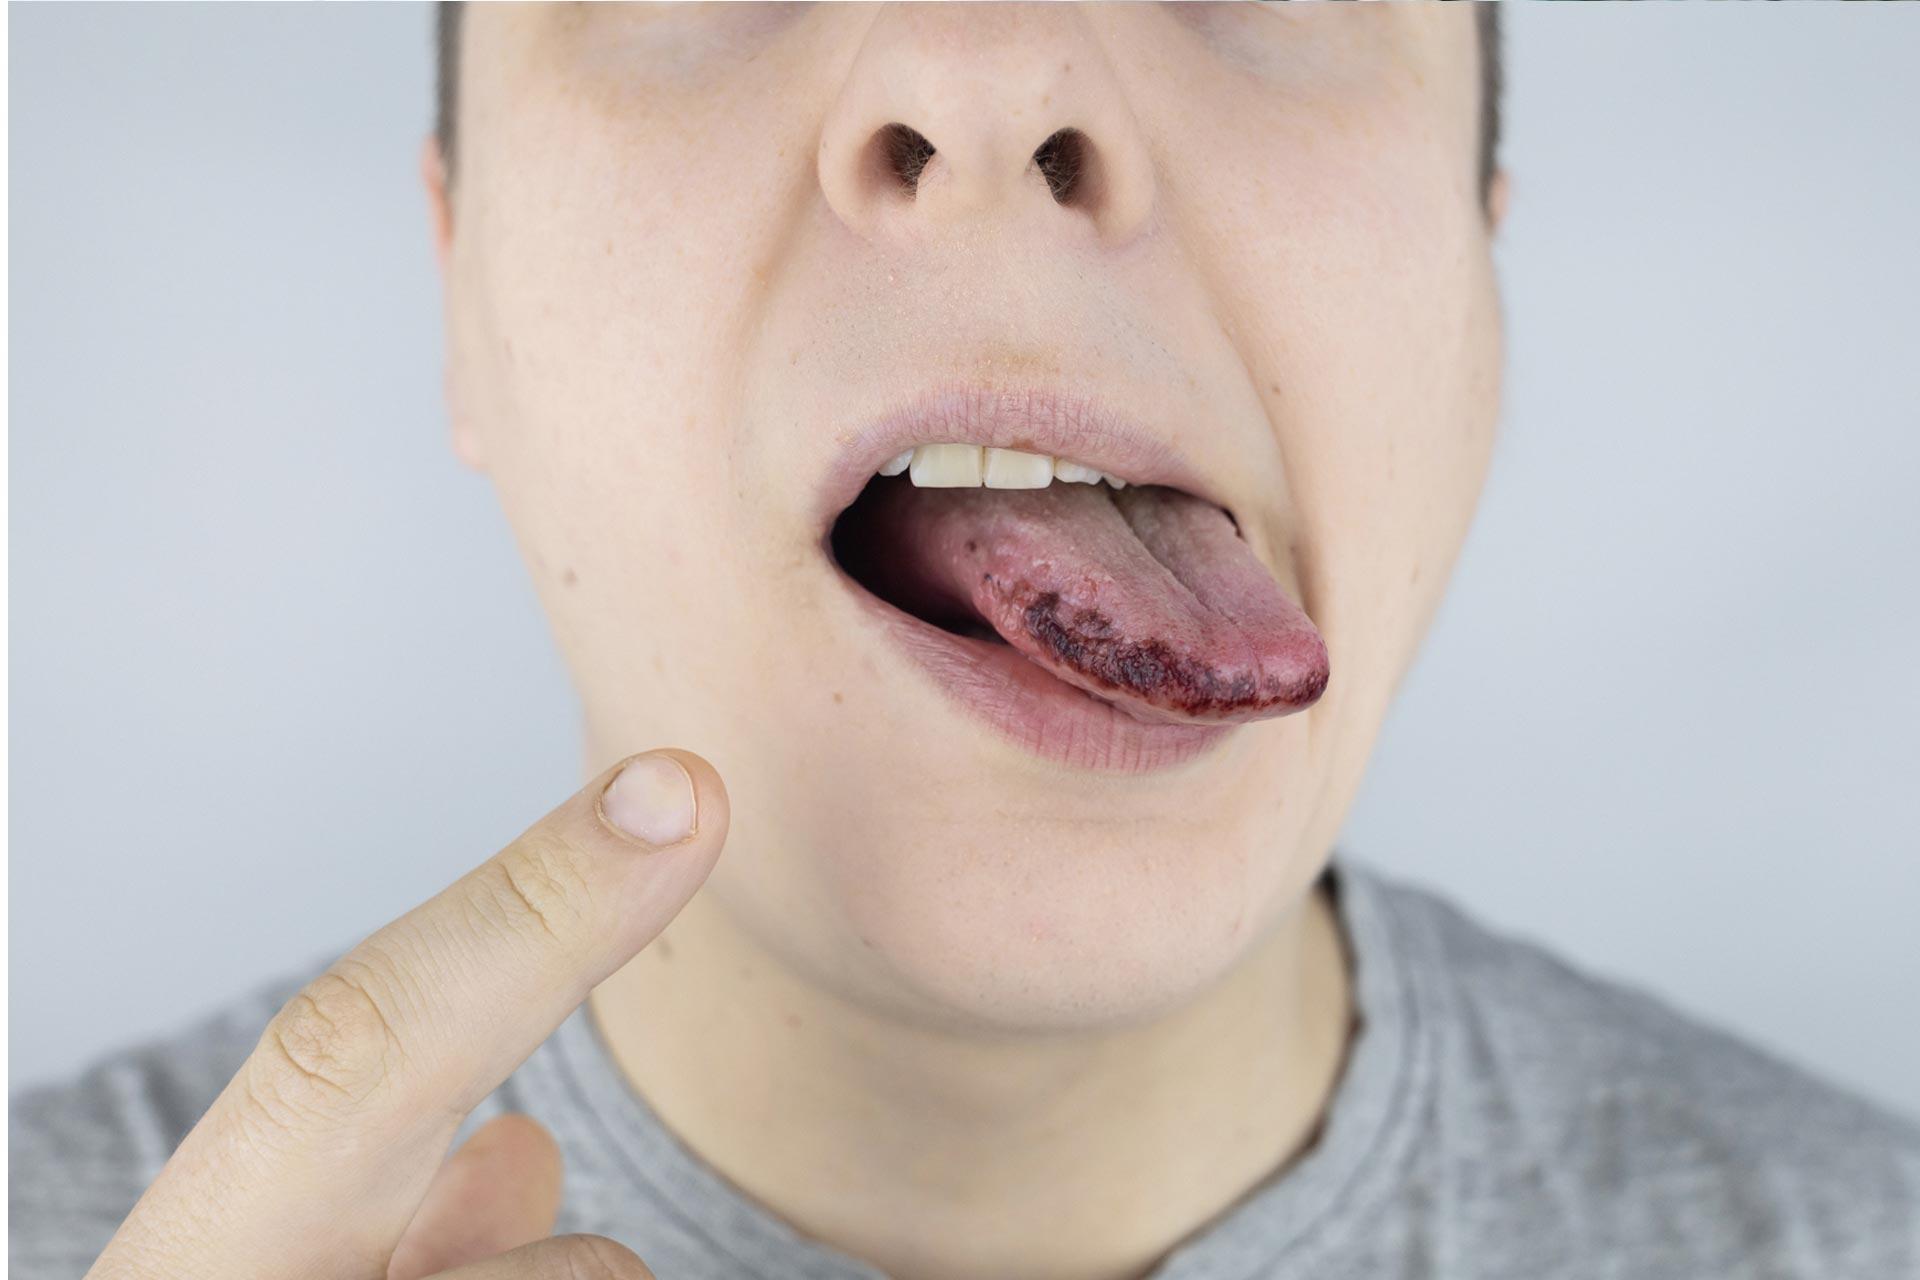 Black Spots on the Tongue: Causes, Symptoms, Diagnosis, and Treatment